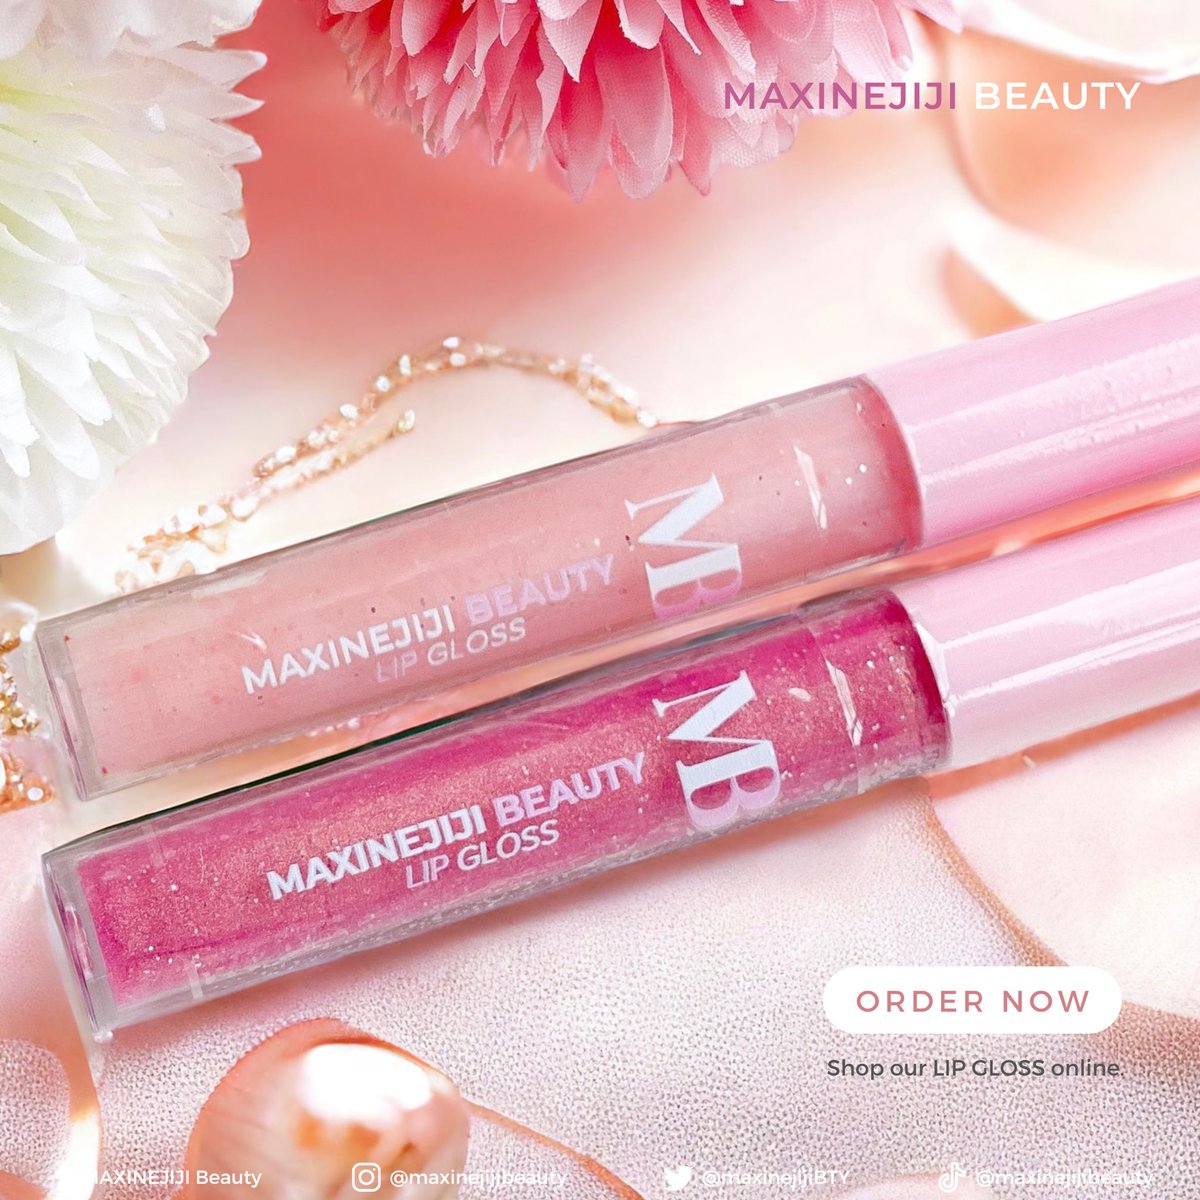 💋 When our lips are glossy and shiny, ✨they apprear to be more fuller and eye-catching. 👄👄🥰✨ 

👄 If you want to have some color on your lips, 👄 but doesn't want an intense, ✨ solid lip color effect. ✨ 

Get yours now! 🛍🛒🤩

#BeautyWithoutLimits
#MAXINEJIJIBeauty